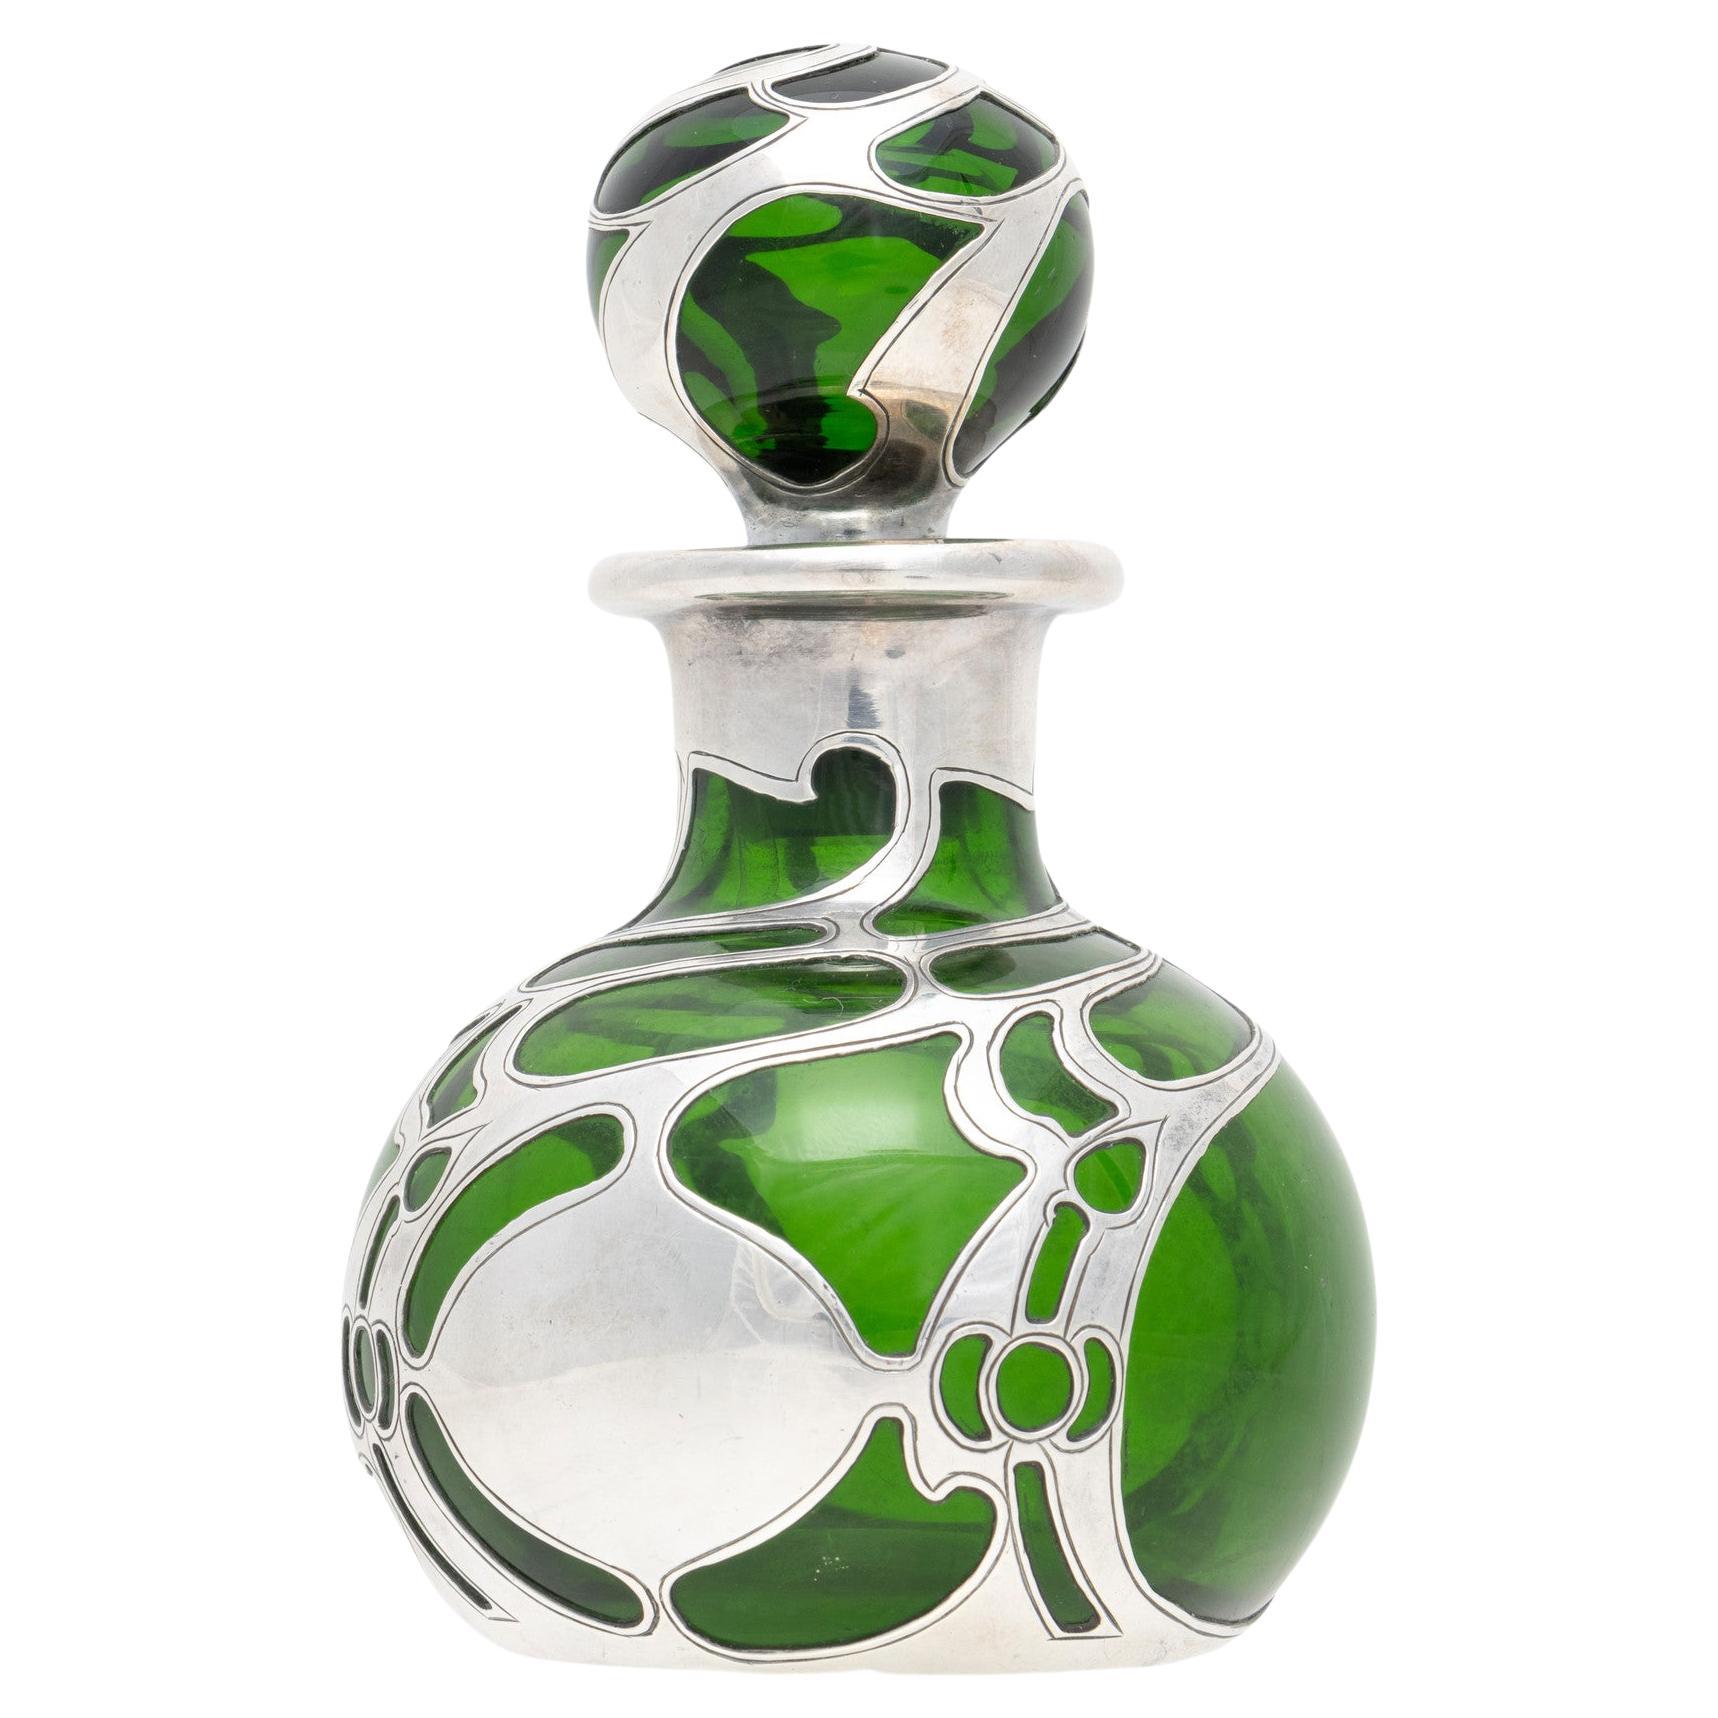 Gorham Sterling Silver and Emerald Glass Overlaid Perfume Bottle